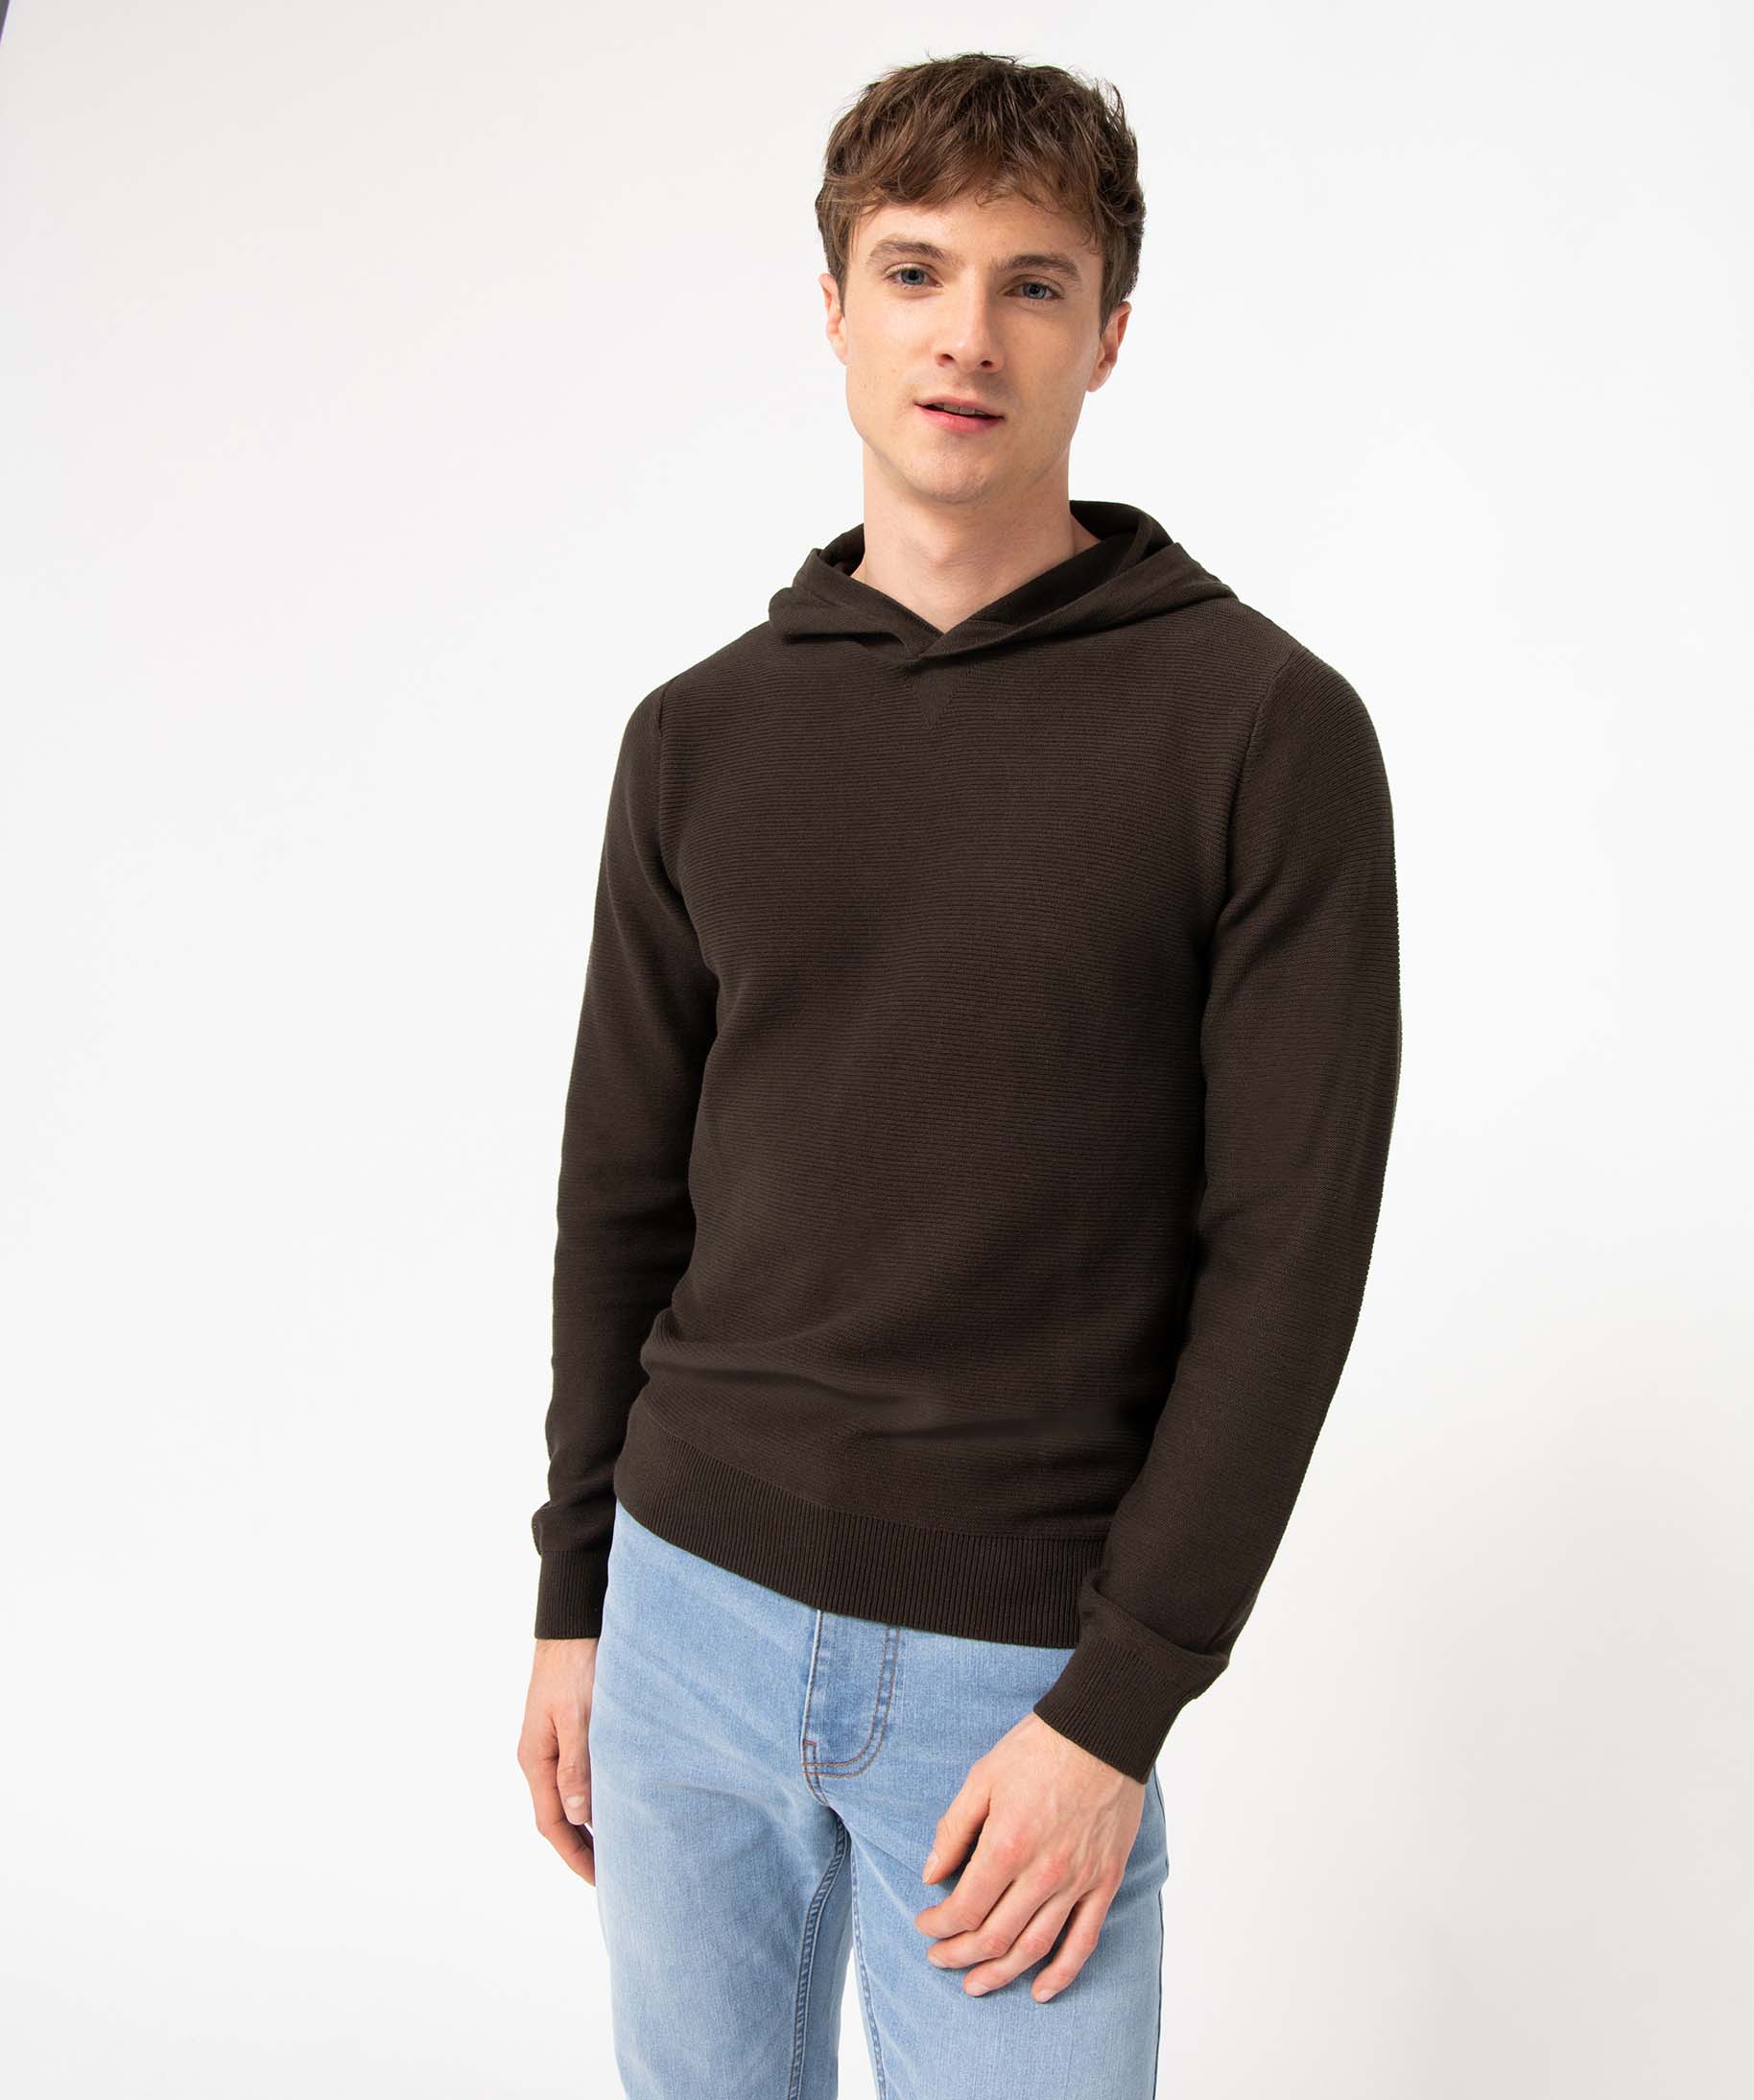 pull homme en maille cotelee a capuche brun pulls